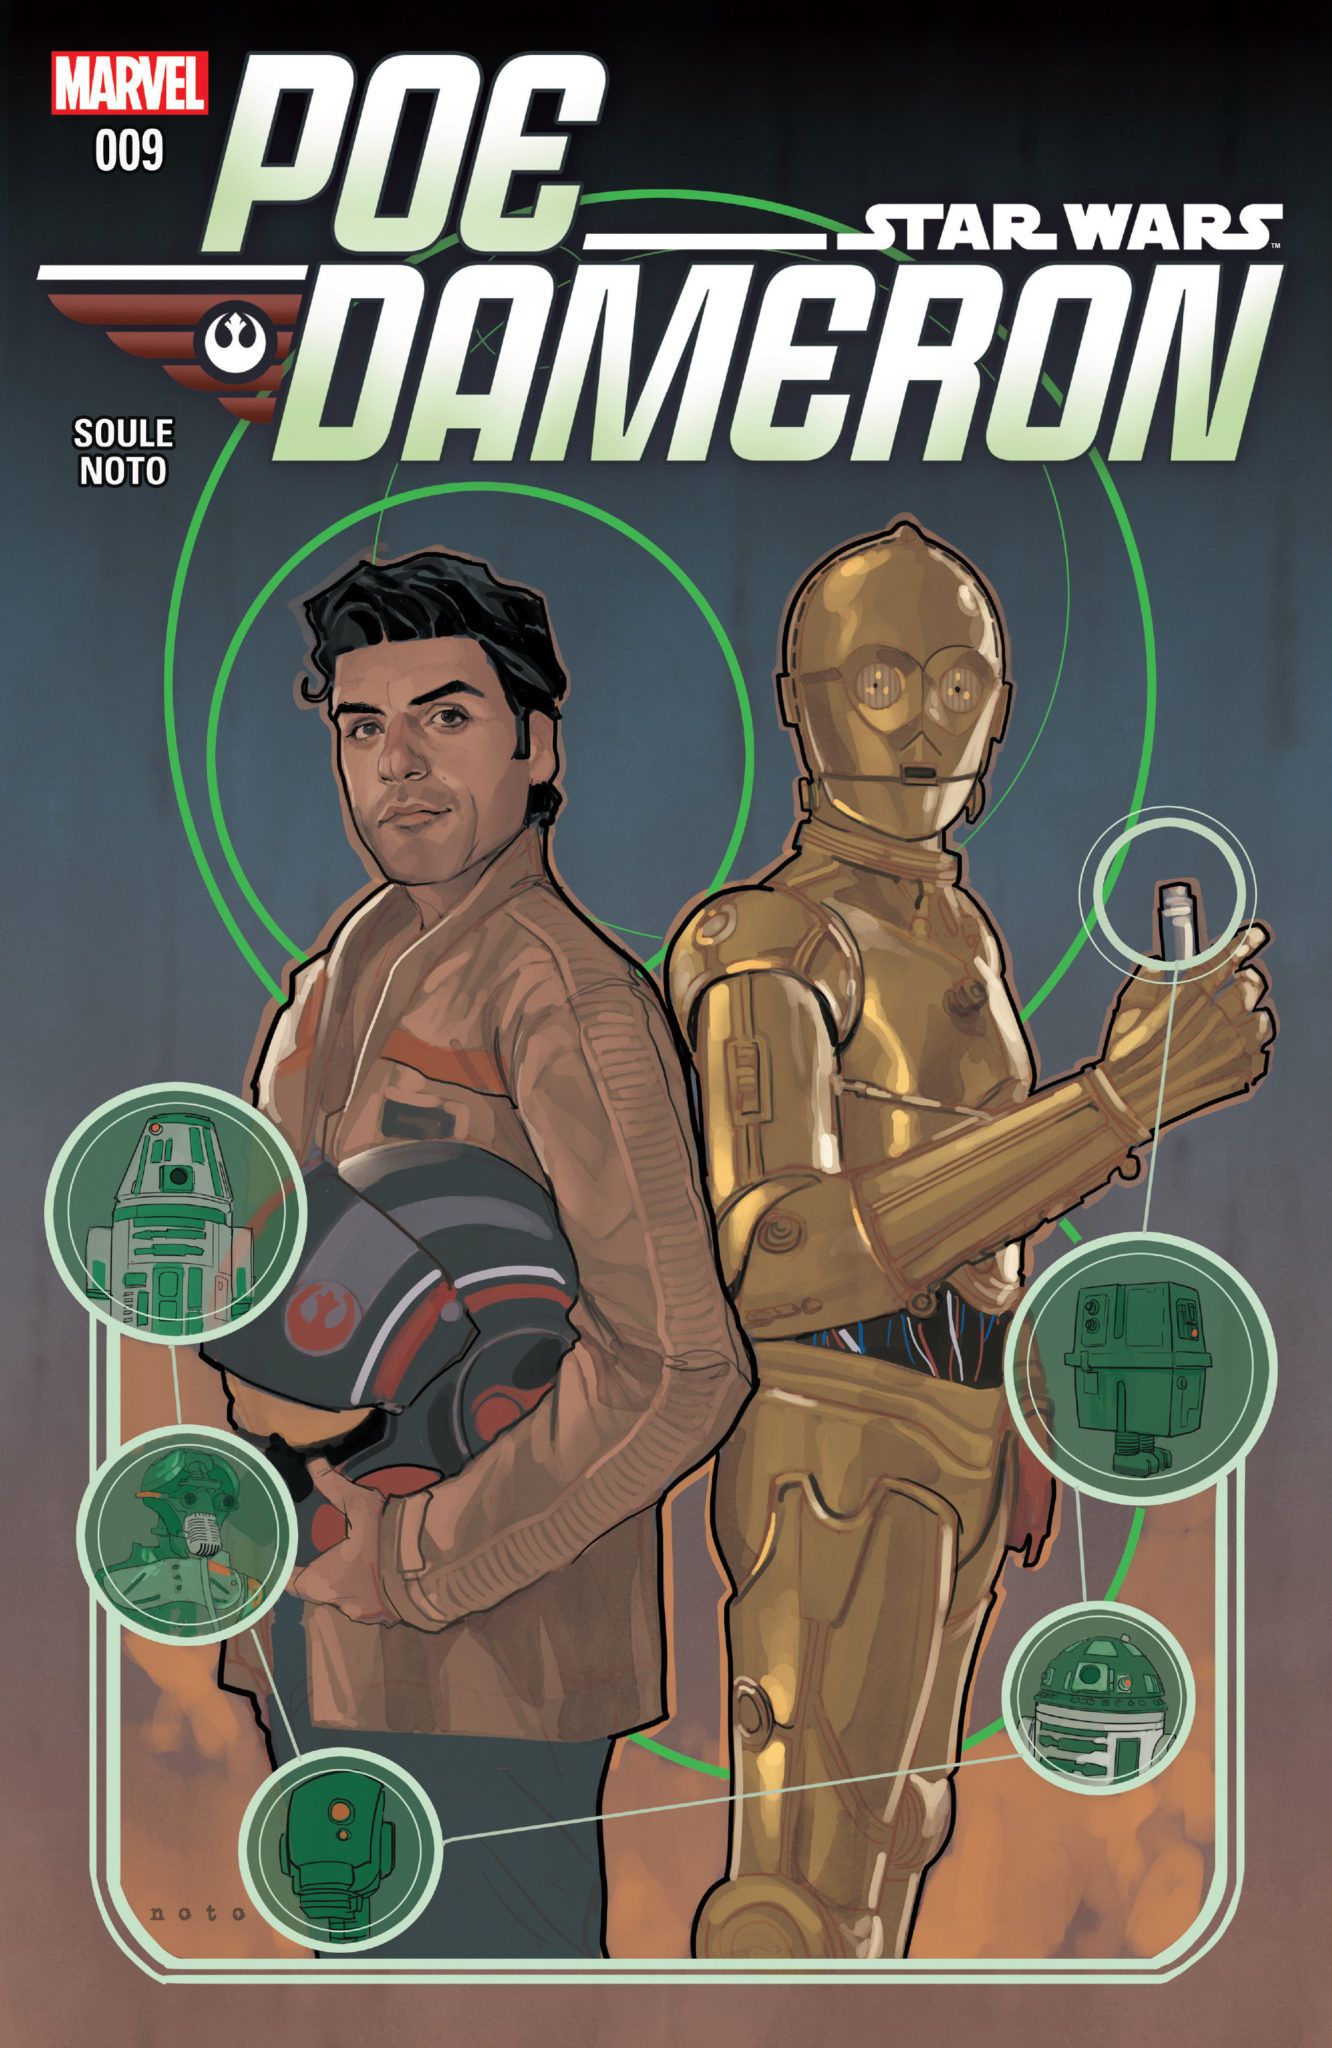 Cover art for Poe Dameron #9 shows Poe Dameon and C-3PO standing back-to-back.